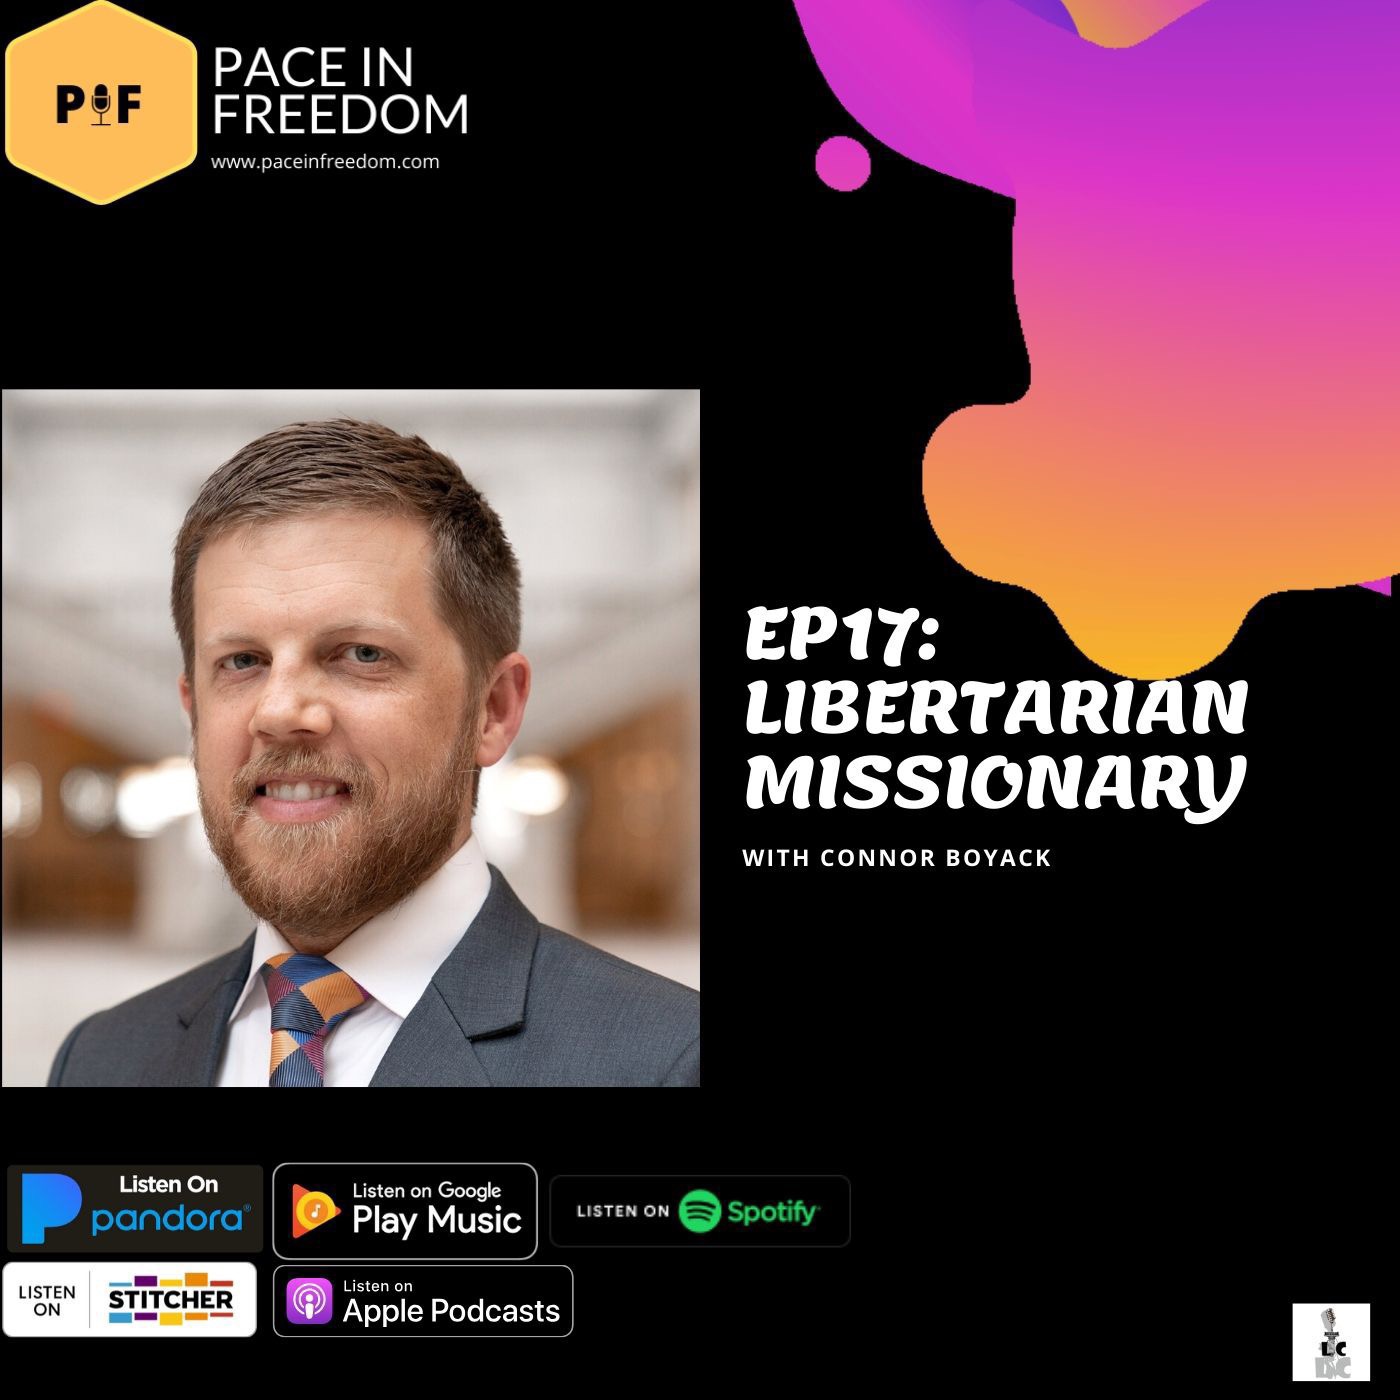 EP17: Libertarian Missionary with Connor Boyack